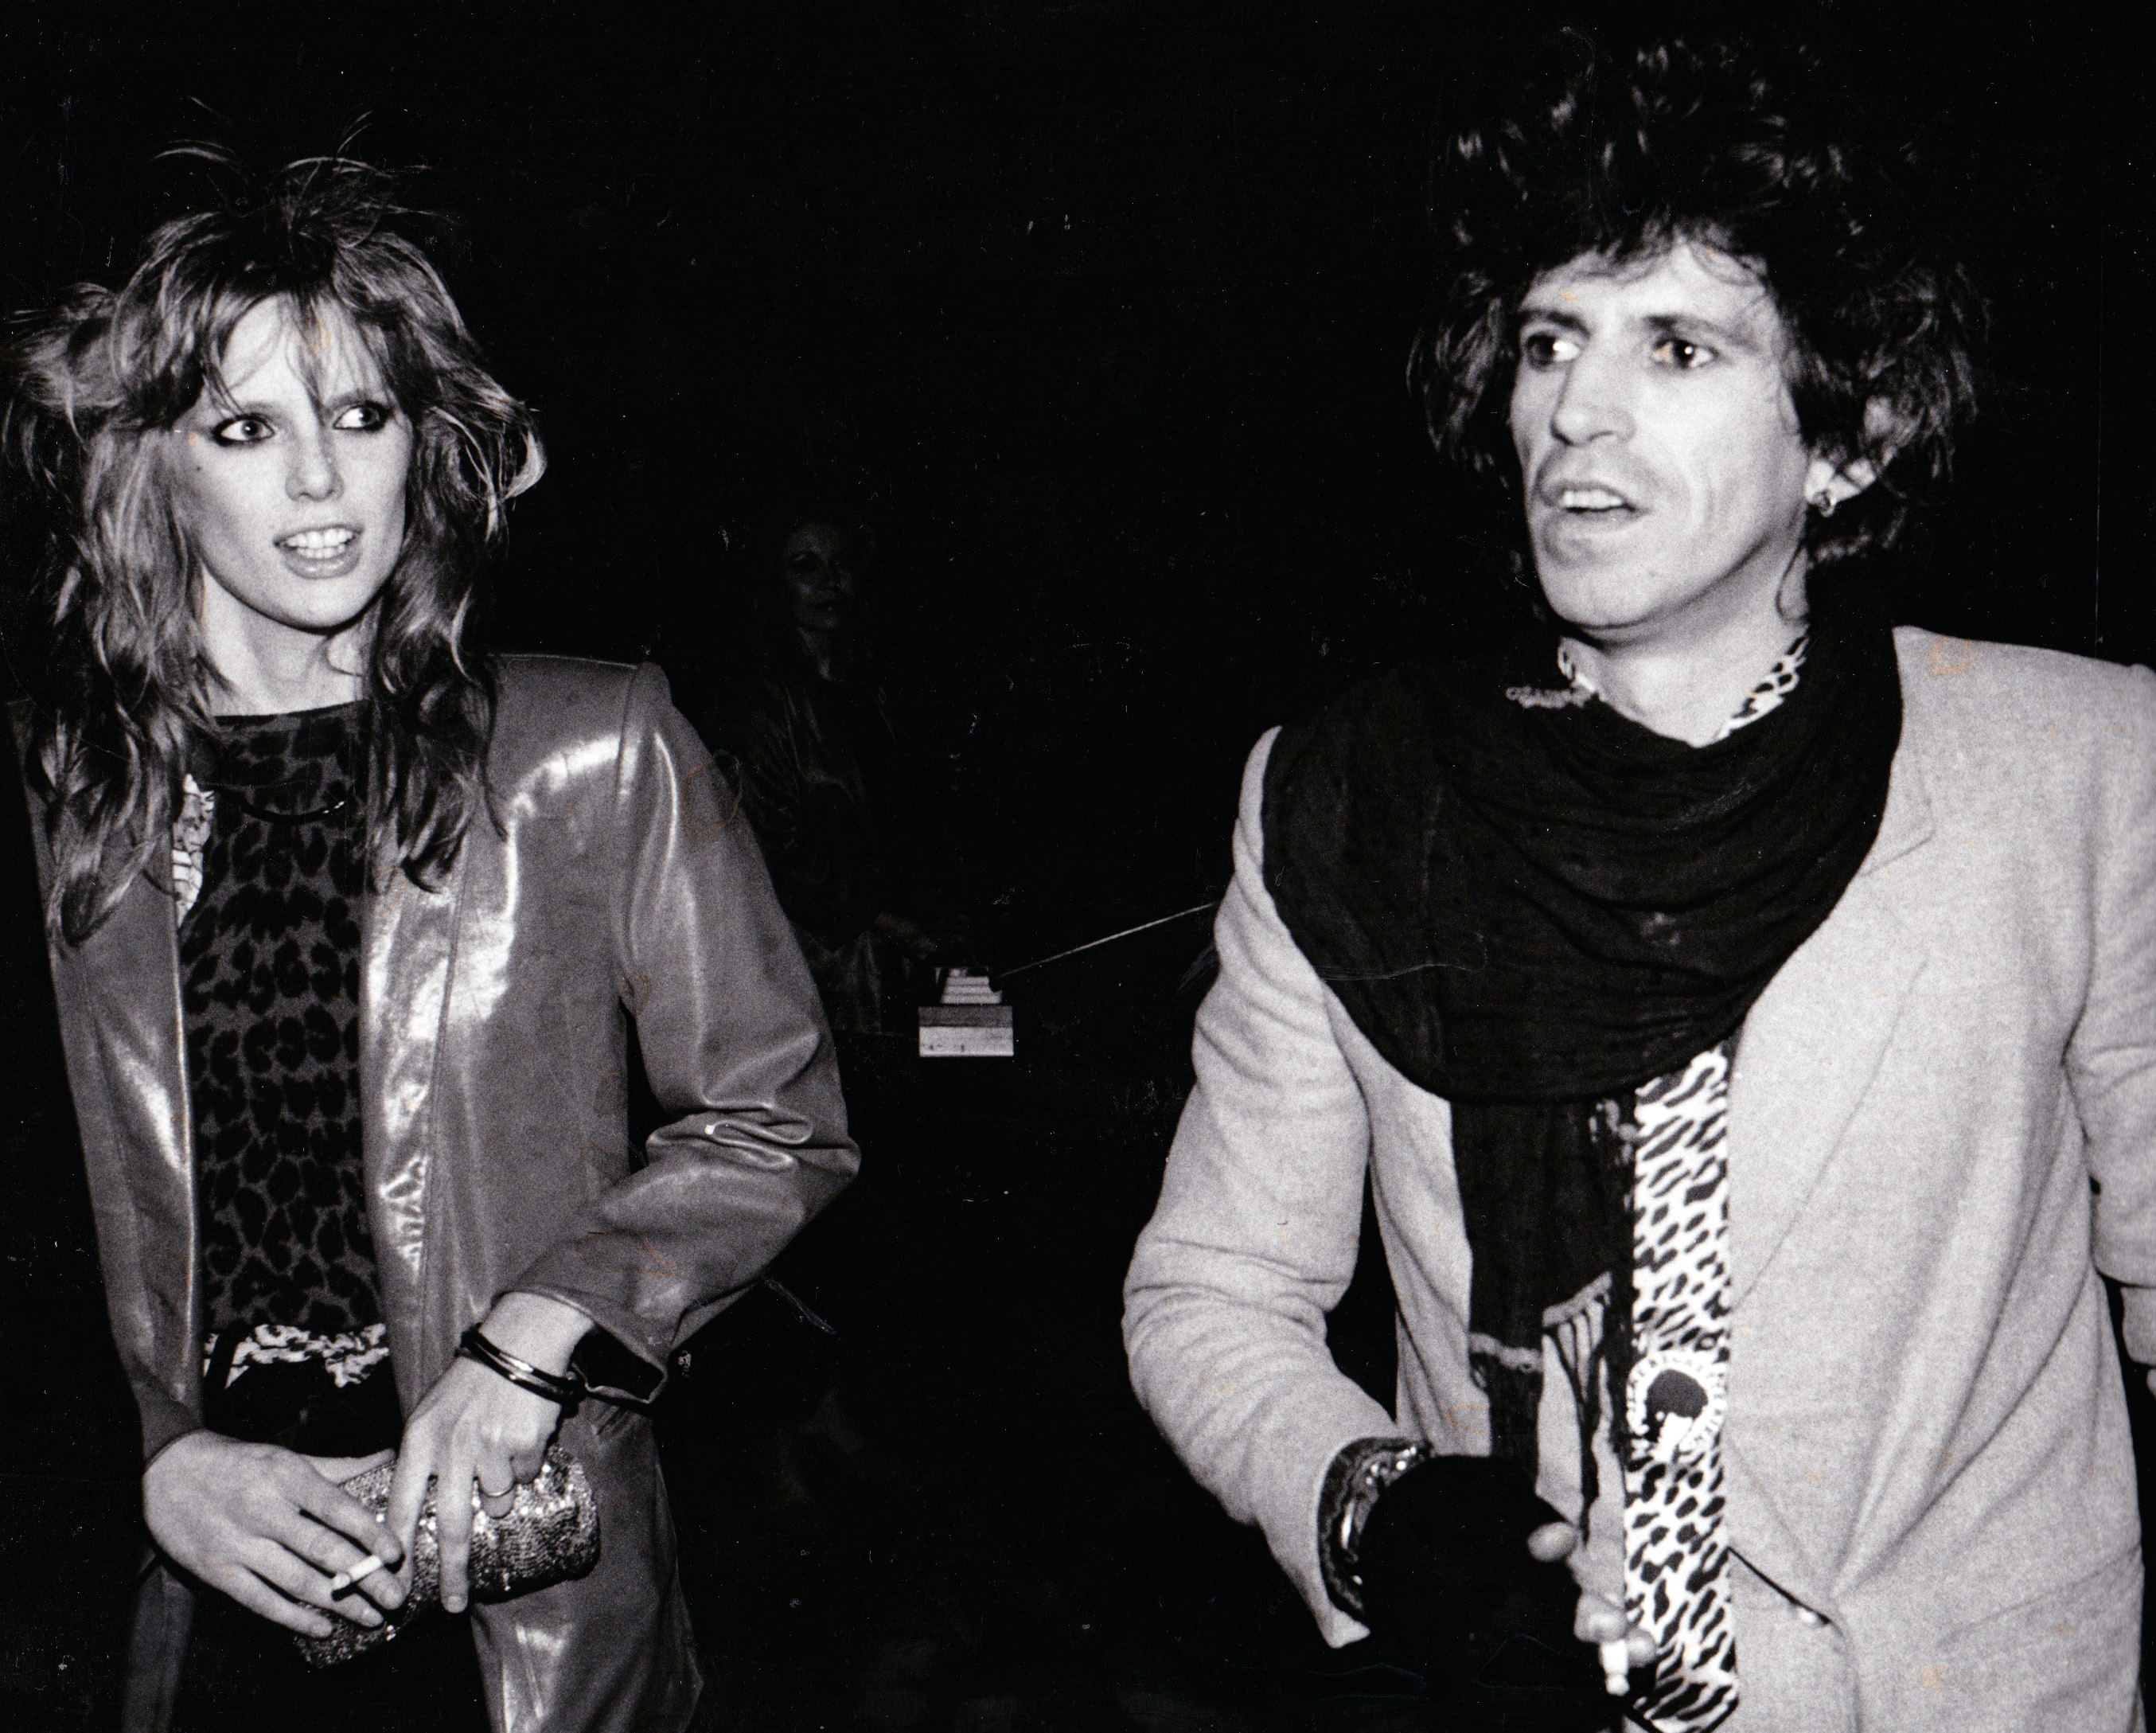 <p>Rolling Stones guitarist Keith Richards was 35 when he met model Patti Hansen on her 23rd birthday at Studio 54 in 1979. Her close friend, model Shaun Casey, and taken her out but they couldn't get a bottle of champagne after last call. So Shaun went up to Keith -- who was a huge star capable of getting whatever he wanted -- and "pointed out this blonde beauty dancing with wild hair flying," the rocker wrote in his autobiography, Life, as told in <a href="https://www.harpersbazaar.com/celebrity/latest/news/a838/patti-hansen-interview-1211/">Harper's Bazaar</a> in 2011. Keith got the champagne and Patti thanked him -- then she kept dancing. "I didn't see her again for a while, but the vision stayed in my mind," Keith wrote in his book. Nine months later, he saw her again at his 36th birthday party -- Mick Jagger's then-partner, model Jerry Hall, had invited her -- and that was it. Keith wooed Patti with mix tapes he covered in collages featuring photos of Patti from magazines, Polaroids and messages written in his blood. "That was his method of communication," Patti told the magazine. "I have everything in boxes. Thousands of those tapes. I've saved everything."</p>